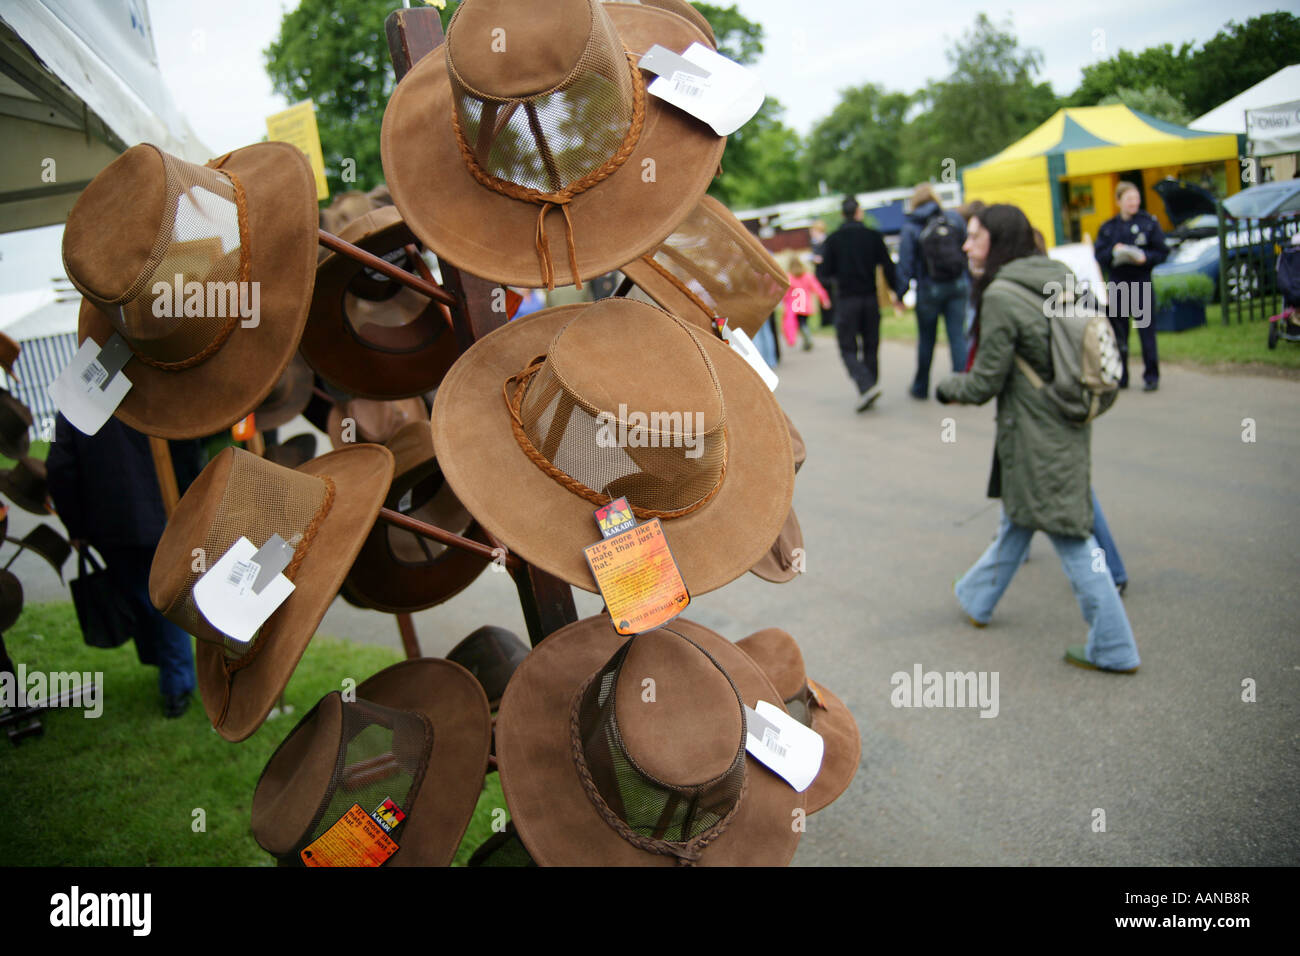 Traditional Australian Akubra wide-brimmed leather hats on sale at a stall, Suffolk agricultural Show, England, UK Stock Photo